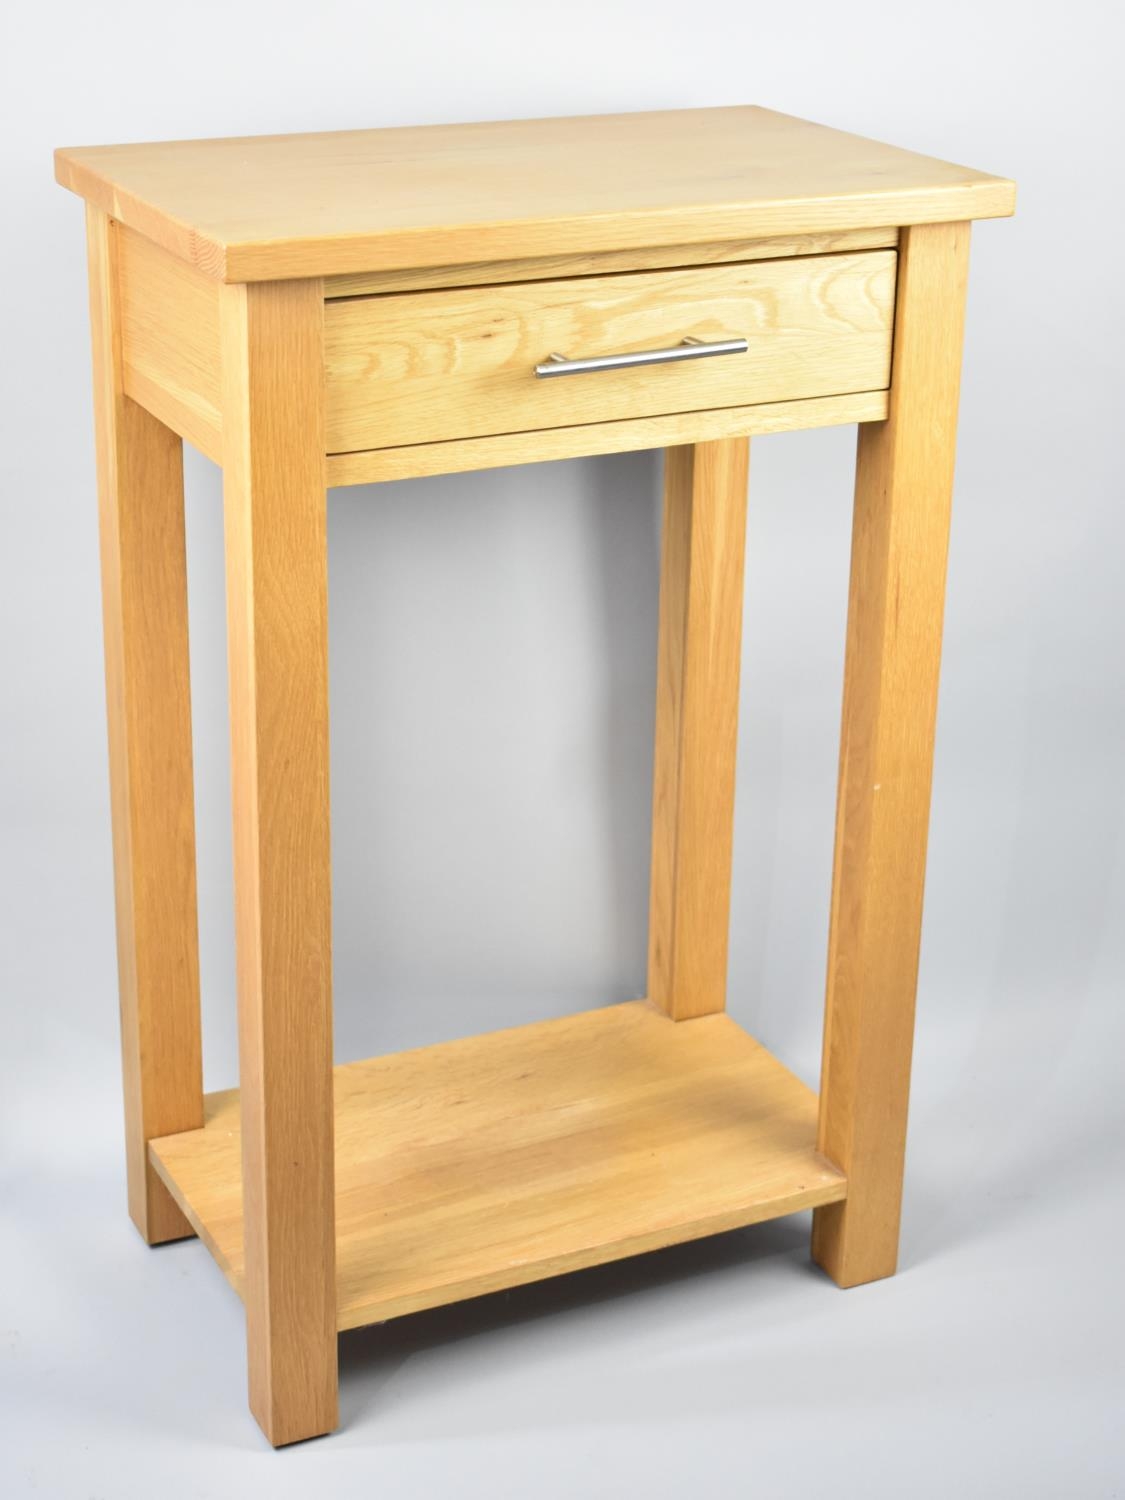 A Modern Kitchen Side Table with Single Drawer and Stretcher Shelf, 56cms Wide and 86cms High